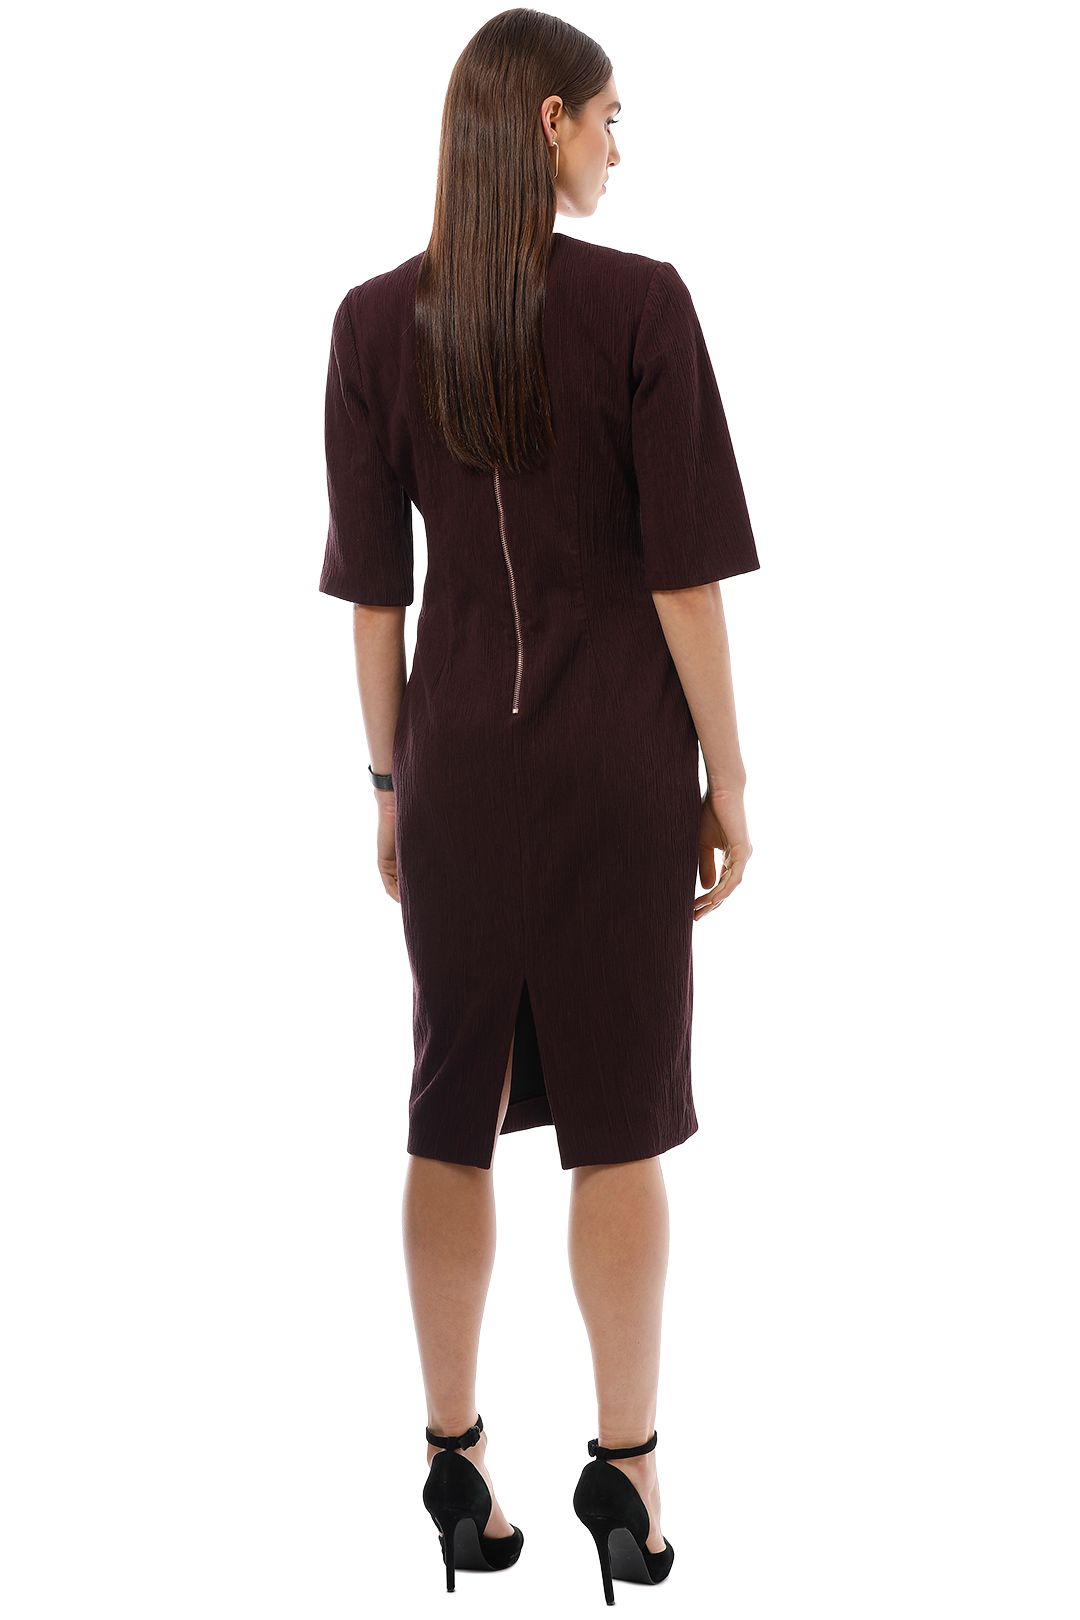 Ginger and Smart - Moduate Dress with Sleeve - Burgundy - Back